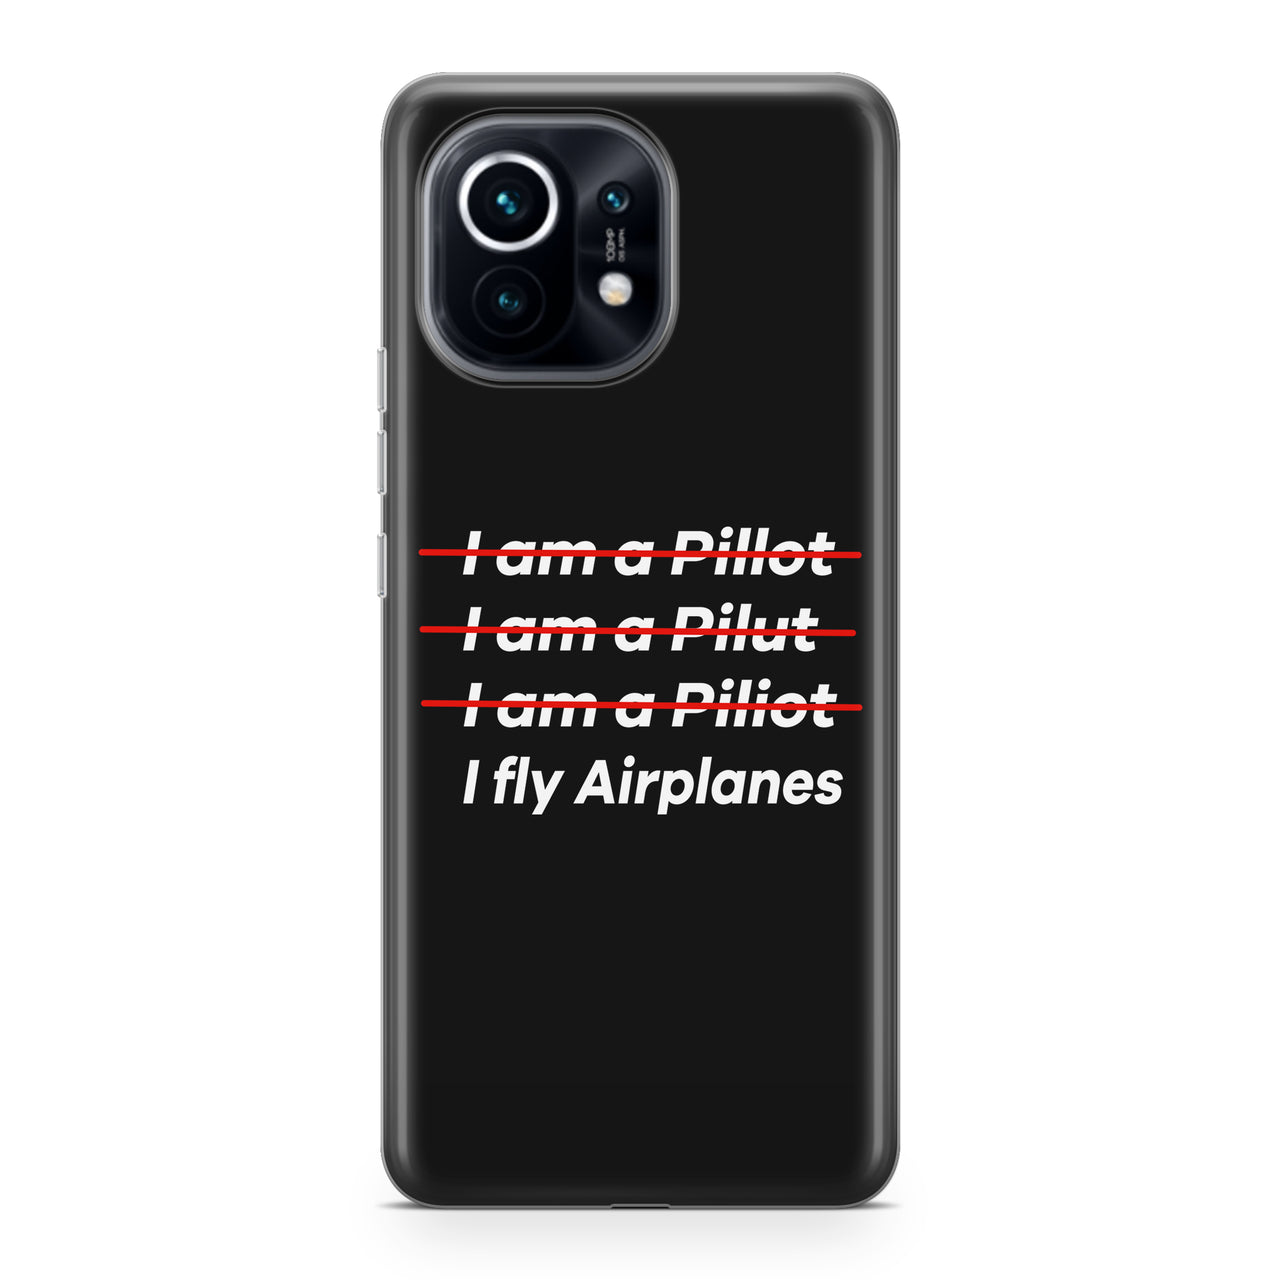 I Fly Airplanes Designed Xiaomi Cases